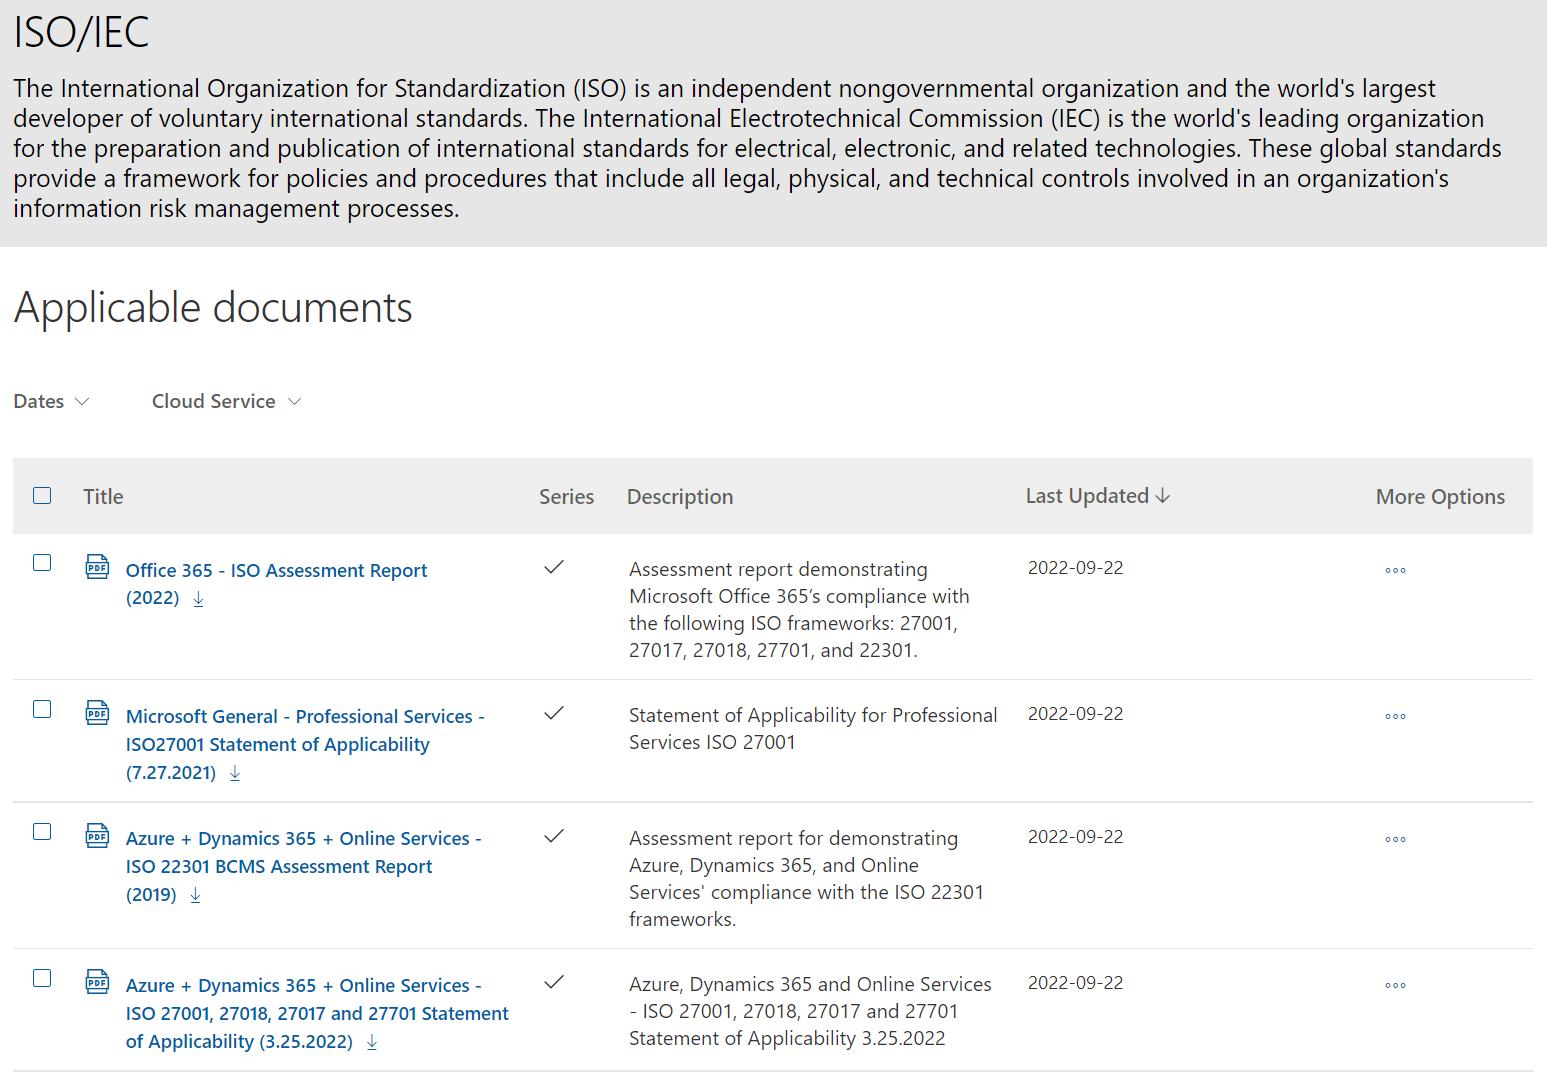 Screenshot of the list of documents available by selecting the ISO/IEC tile.